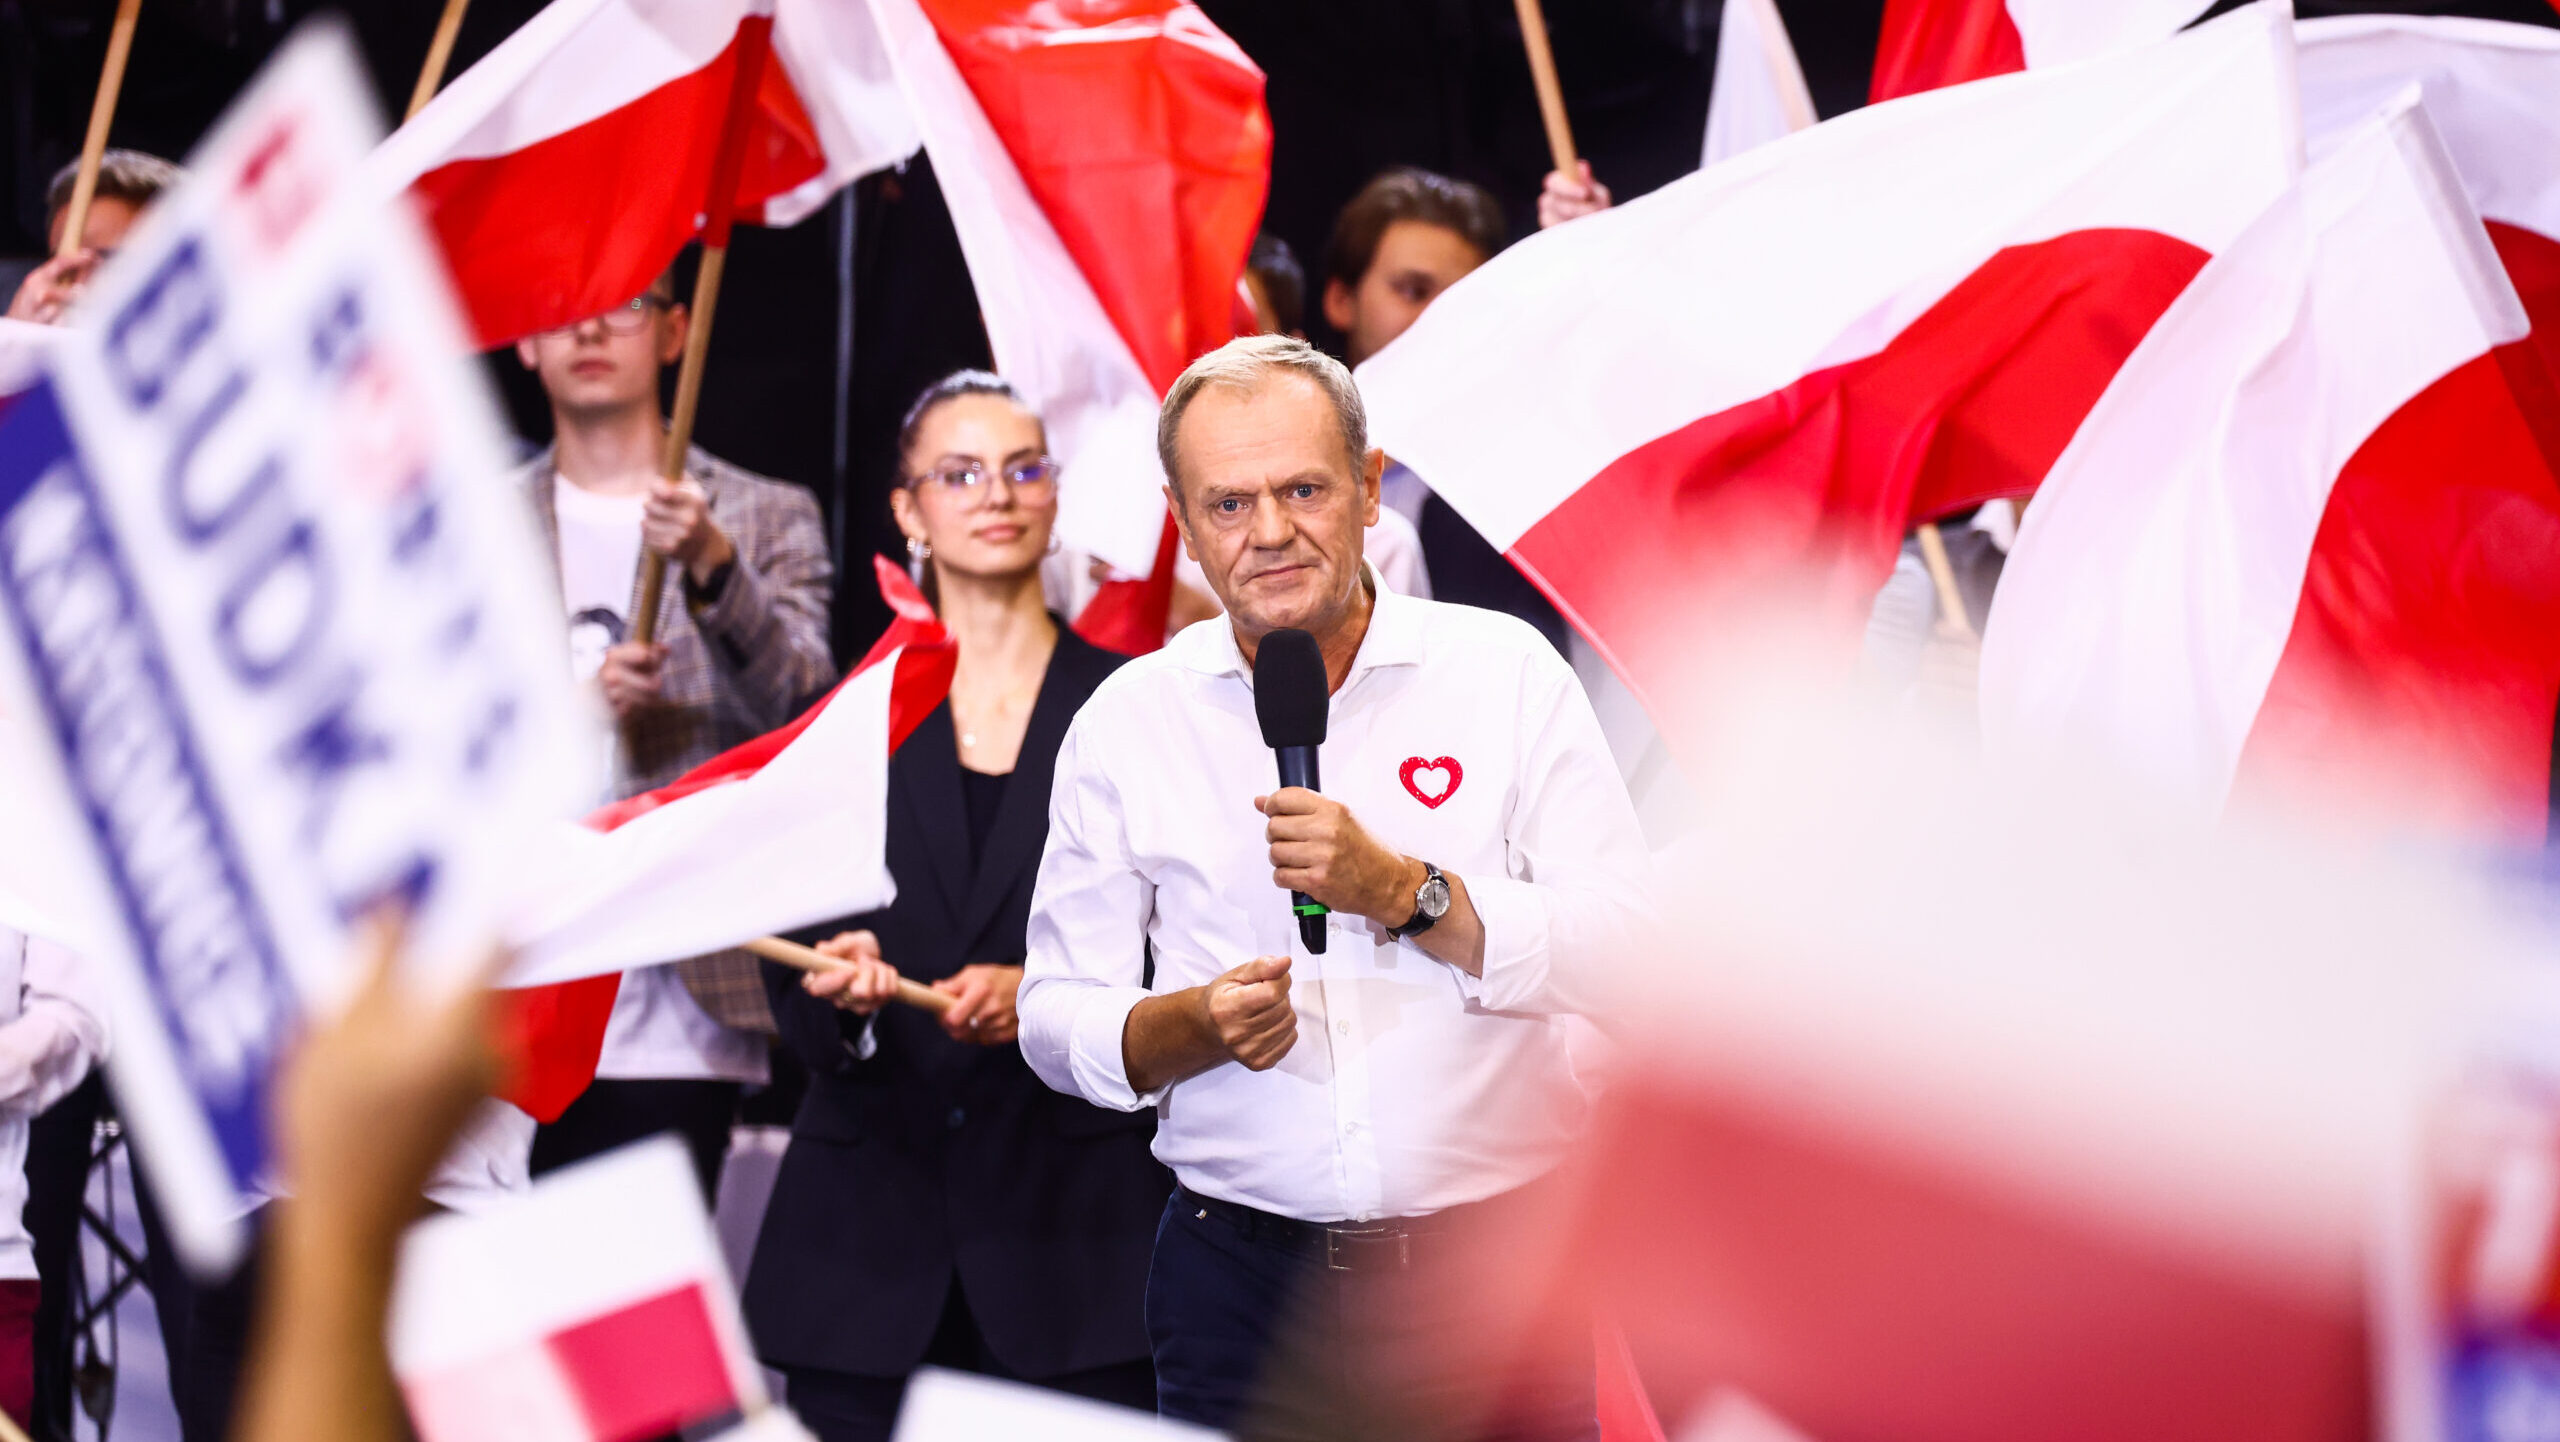 Polish elections should bring changes, but expect defense spending to mostly continue